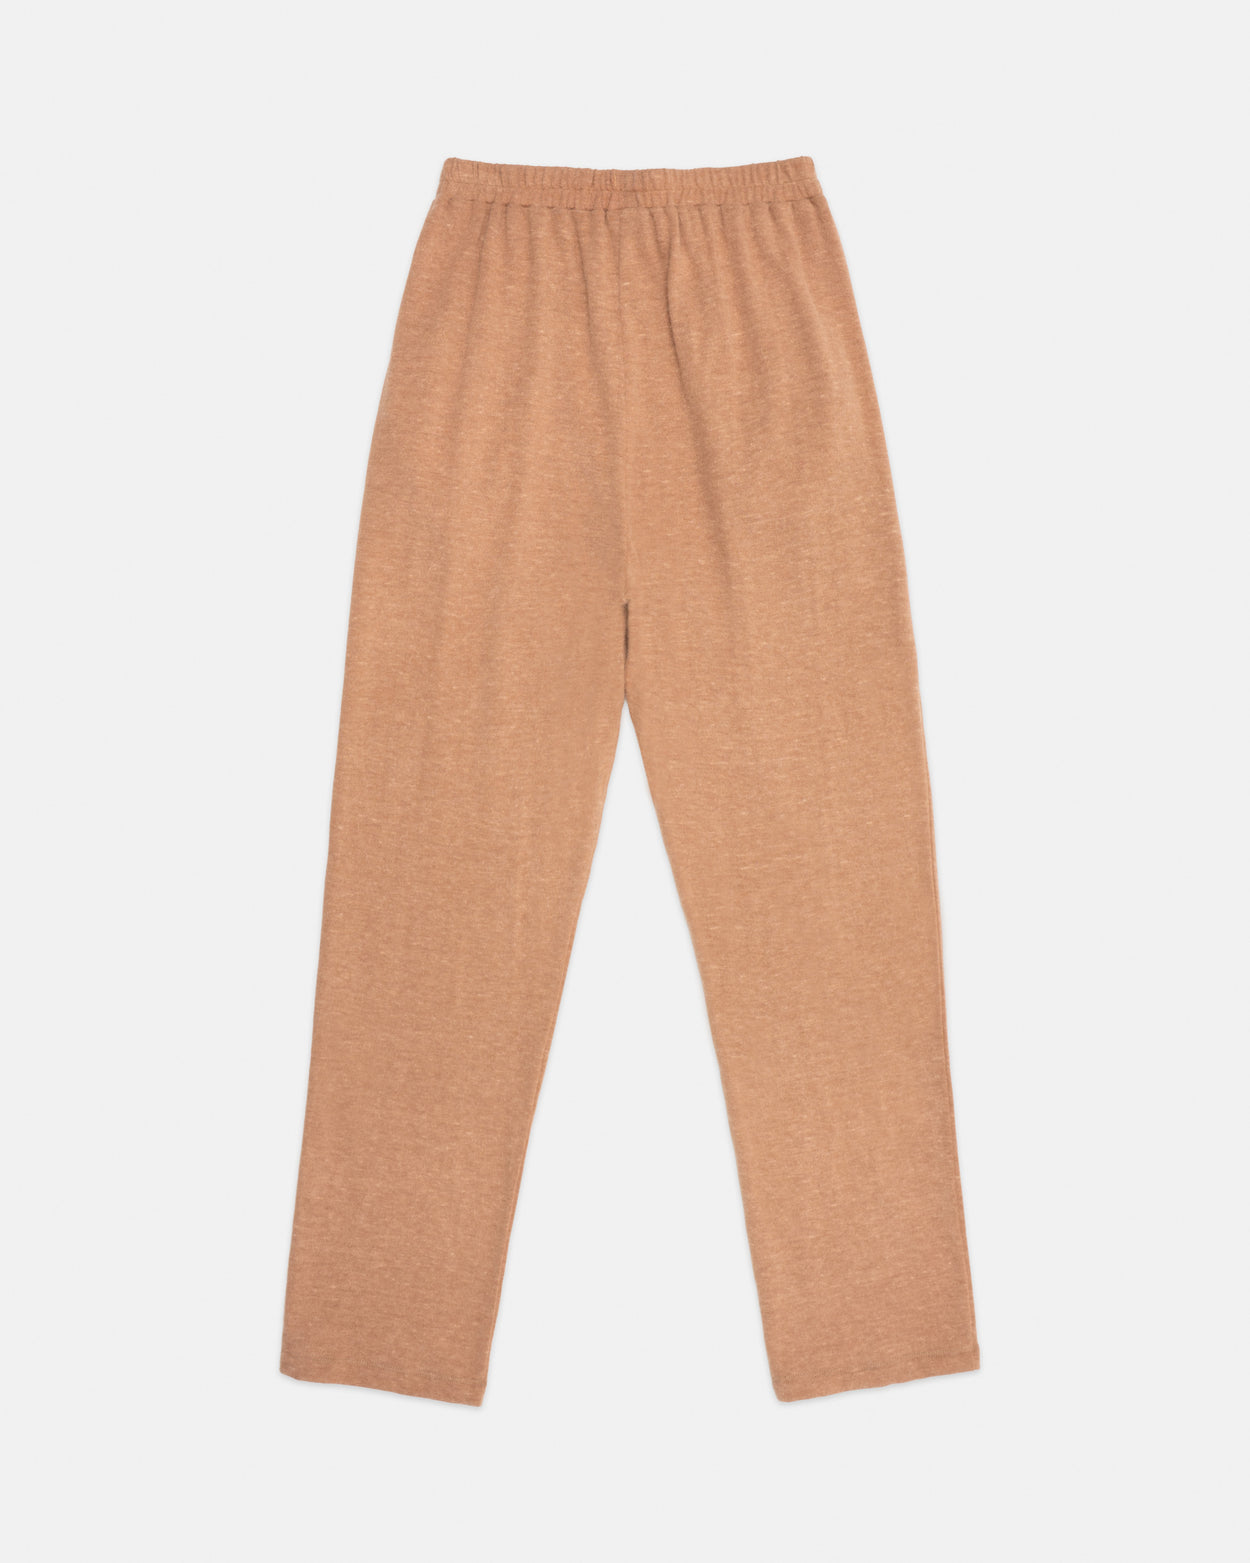 The Camel Cosy Pants